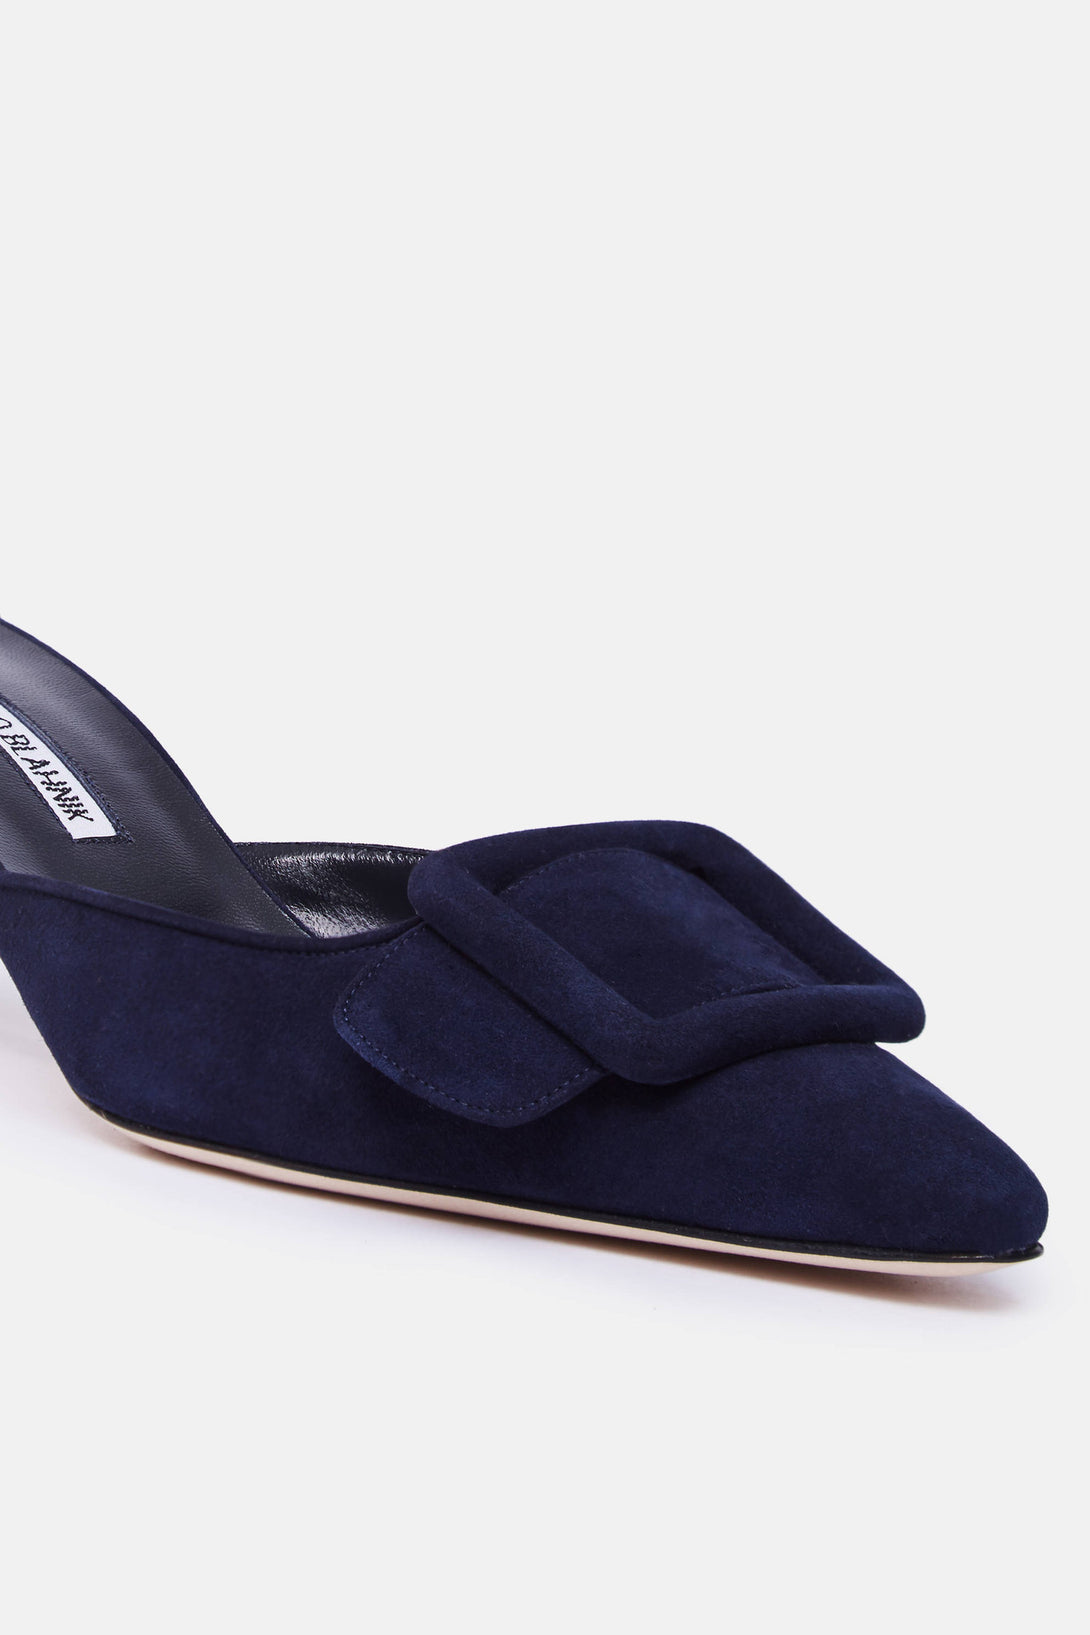 navy blue suede mules c10cac